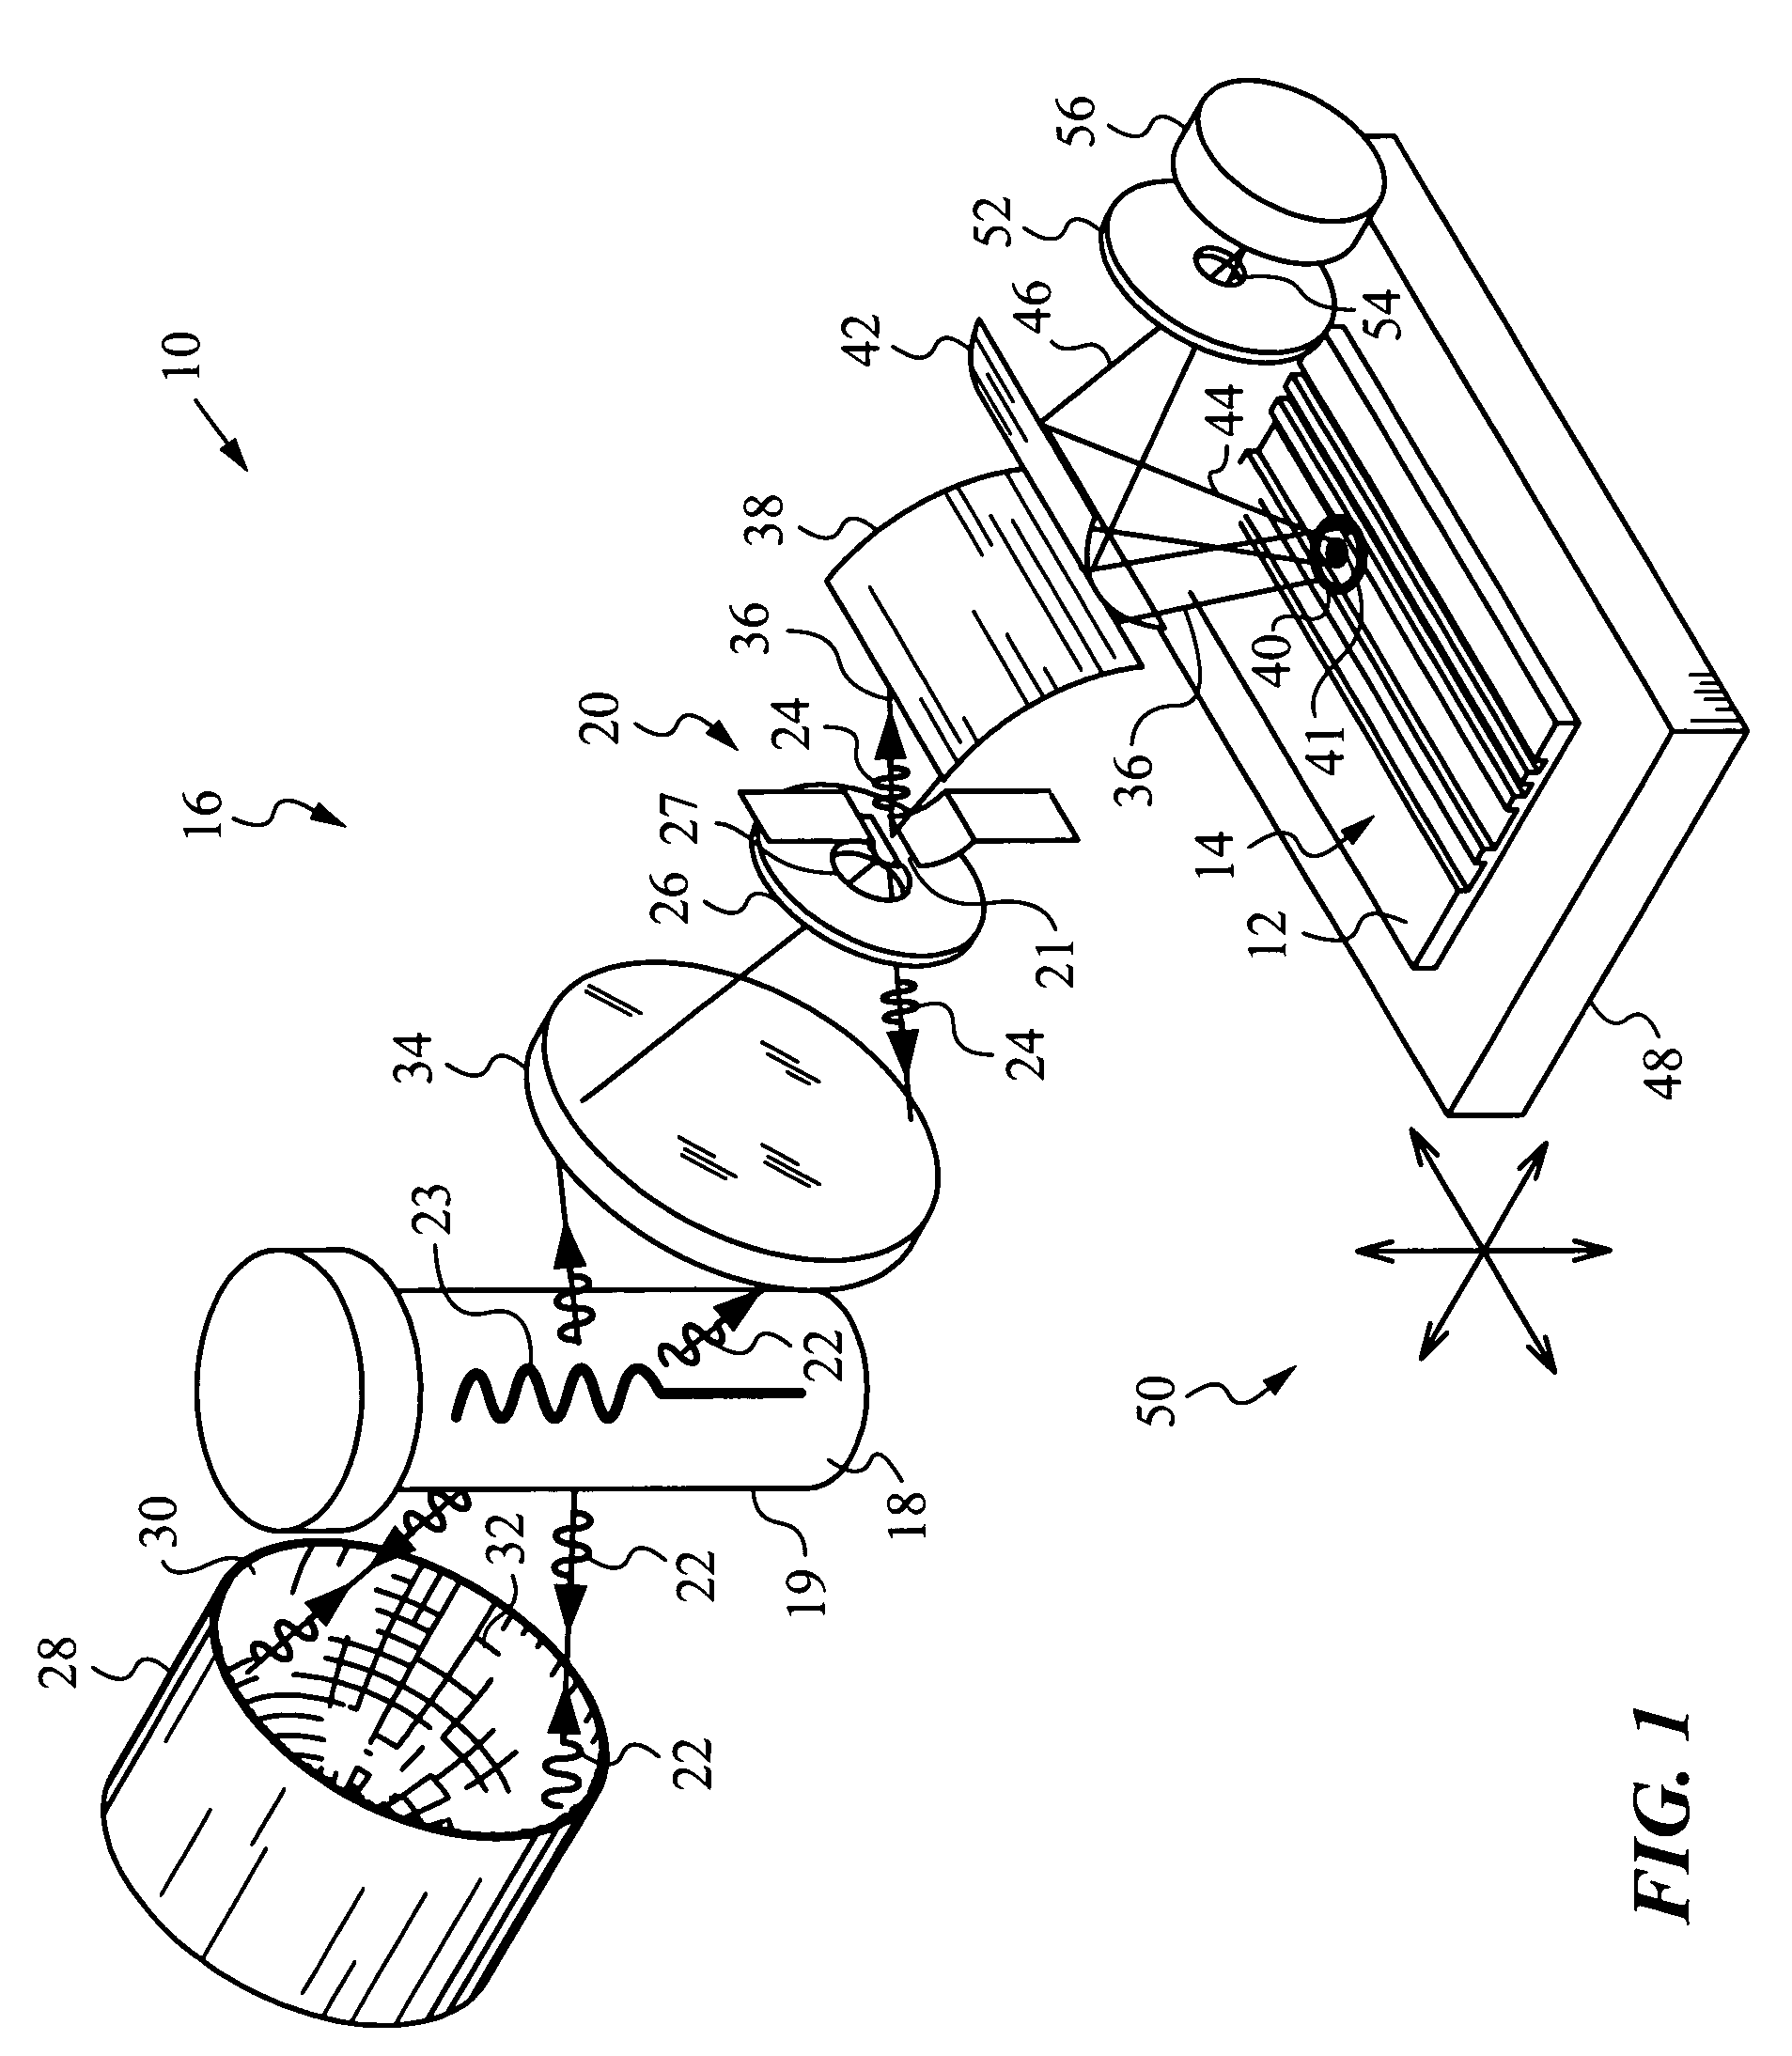 System and method for high intensity small spot optical metrology